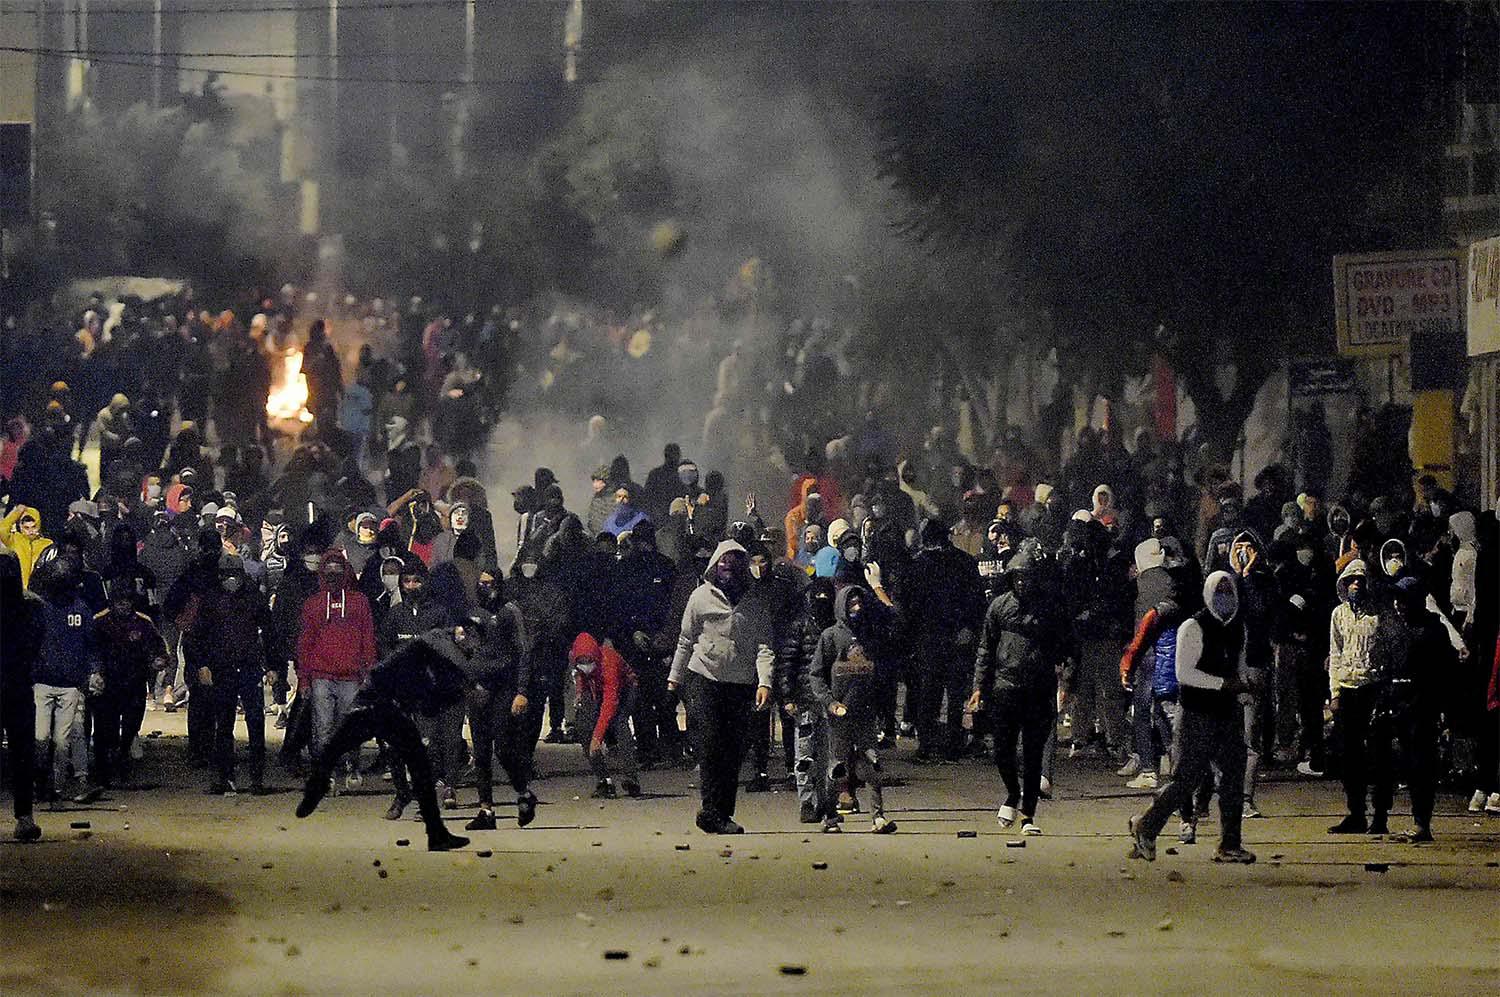 Up to 300 young men clashed with police in Tunisian capital's Ettadamon district